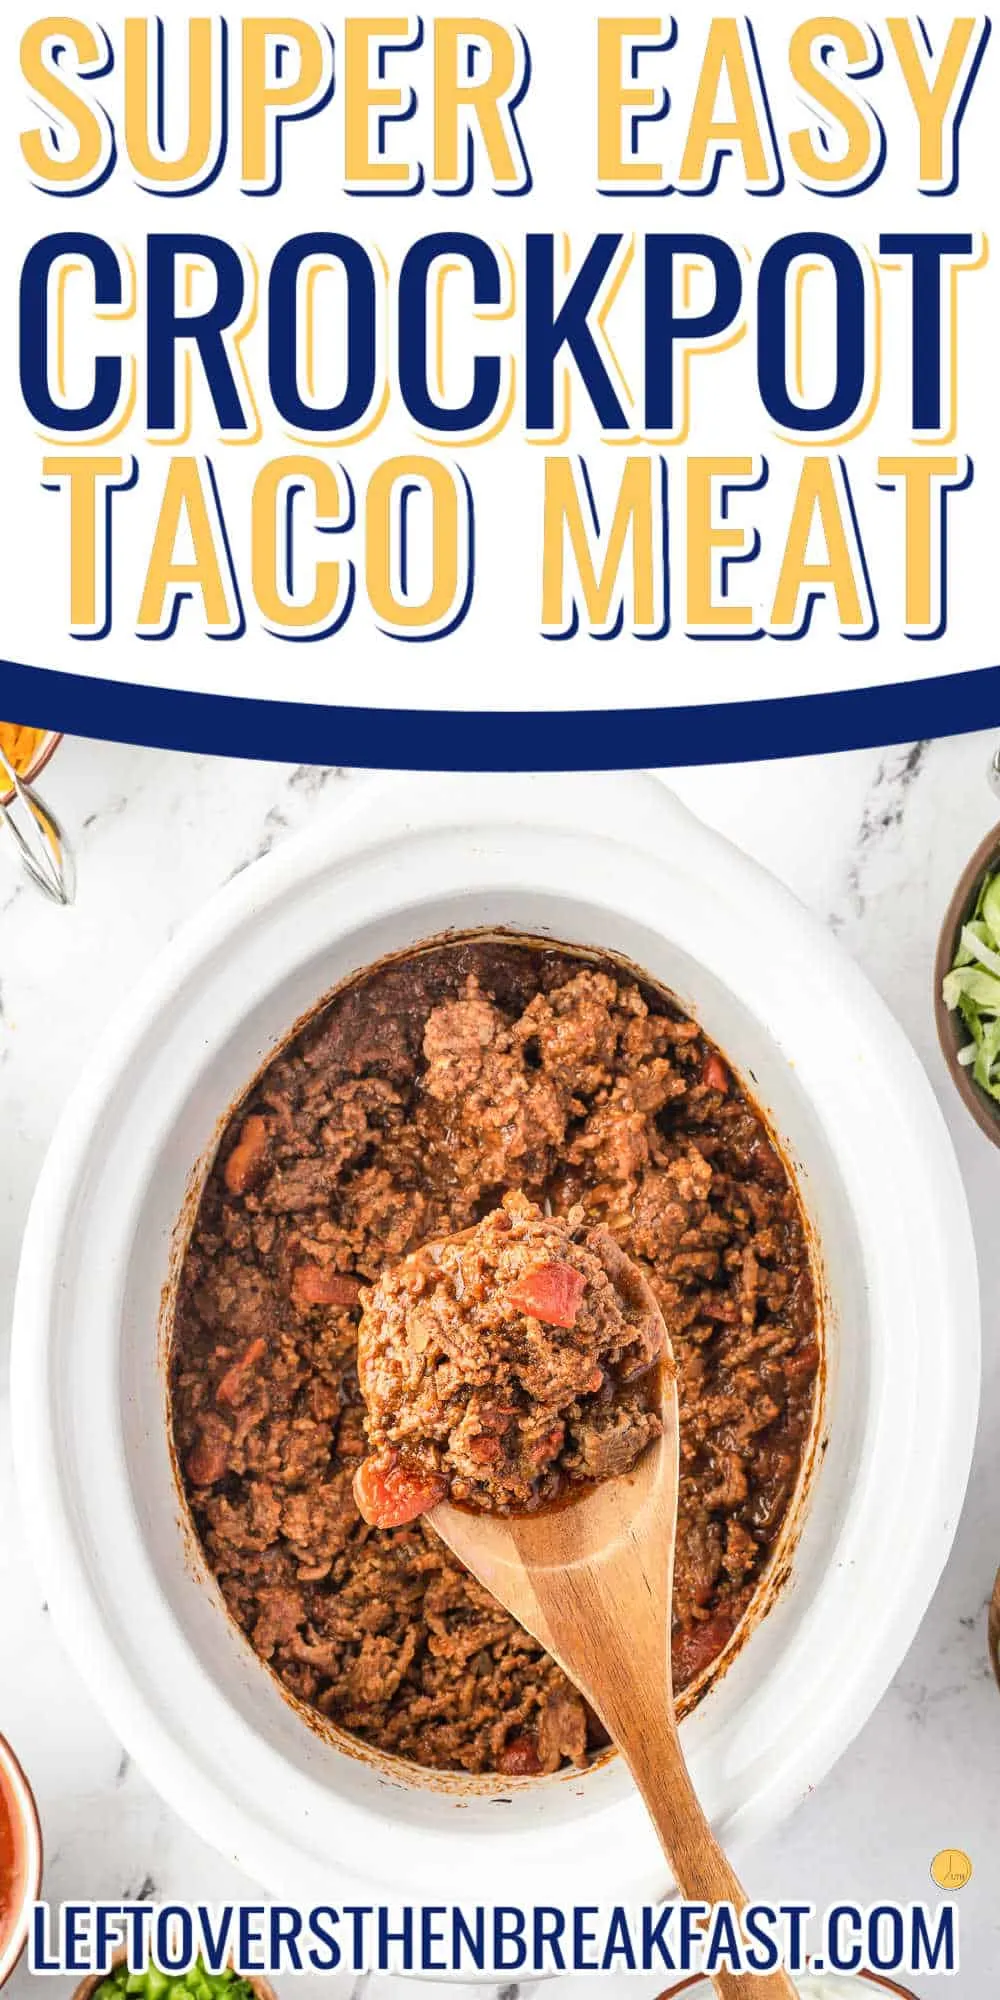 white crockpot with taco meat and text "super easy"